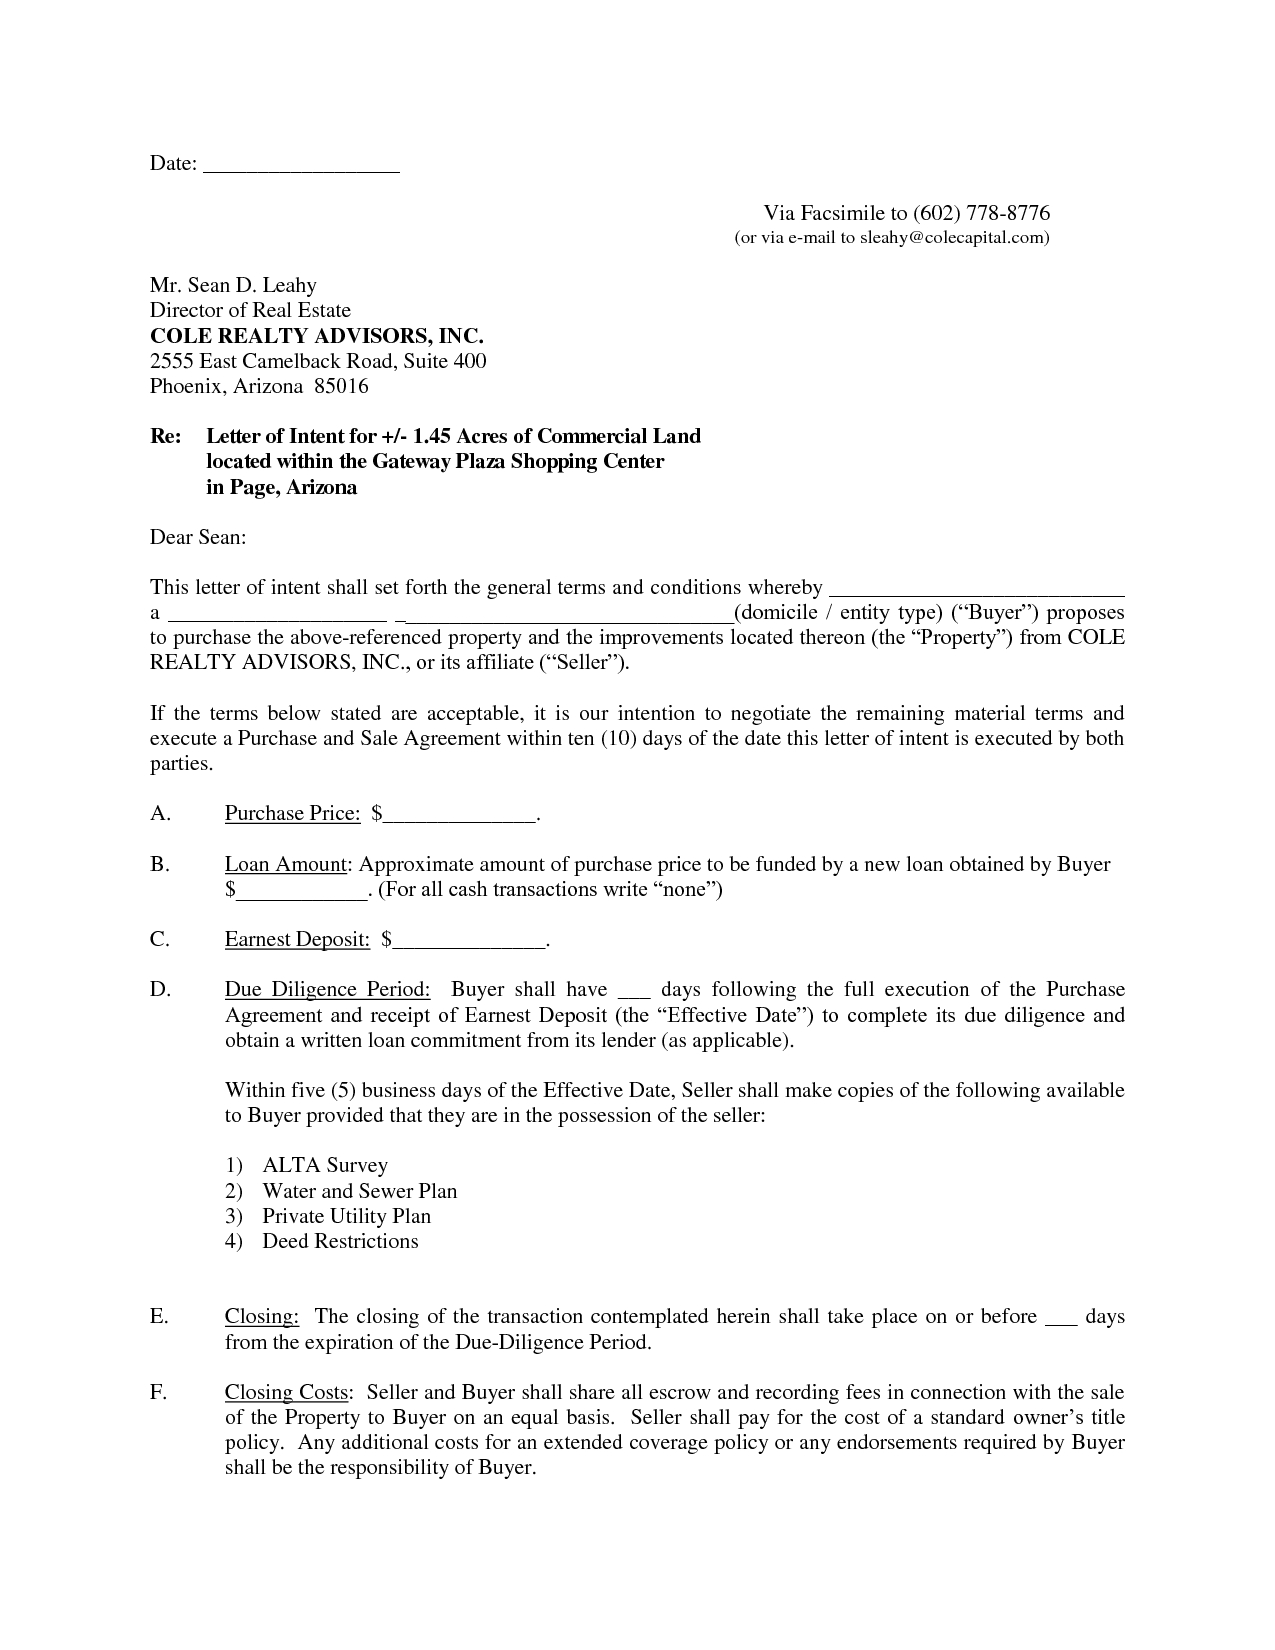 Real Estate Intent To Purchase Agreement Real Estate Loi Template Letter Of Intent For Business Purchase